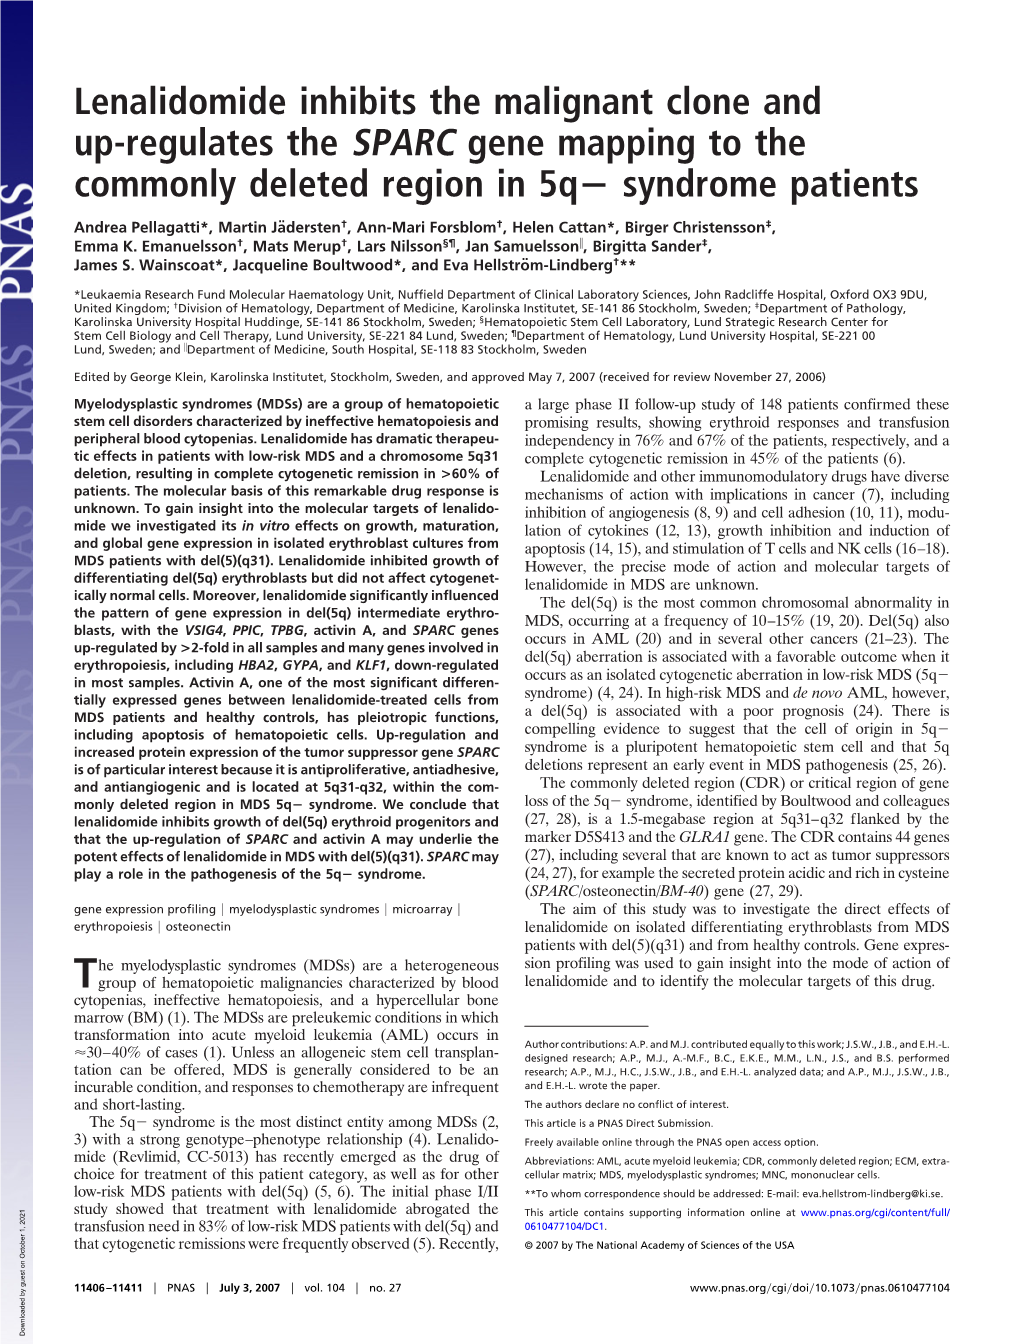 Lenalidomide Inhibits the Malignant Clone and Up-Regulates the SPARC Gene Mapping to the Commonly Deleted Region in 5Q؊ Syndrome Patients